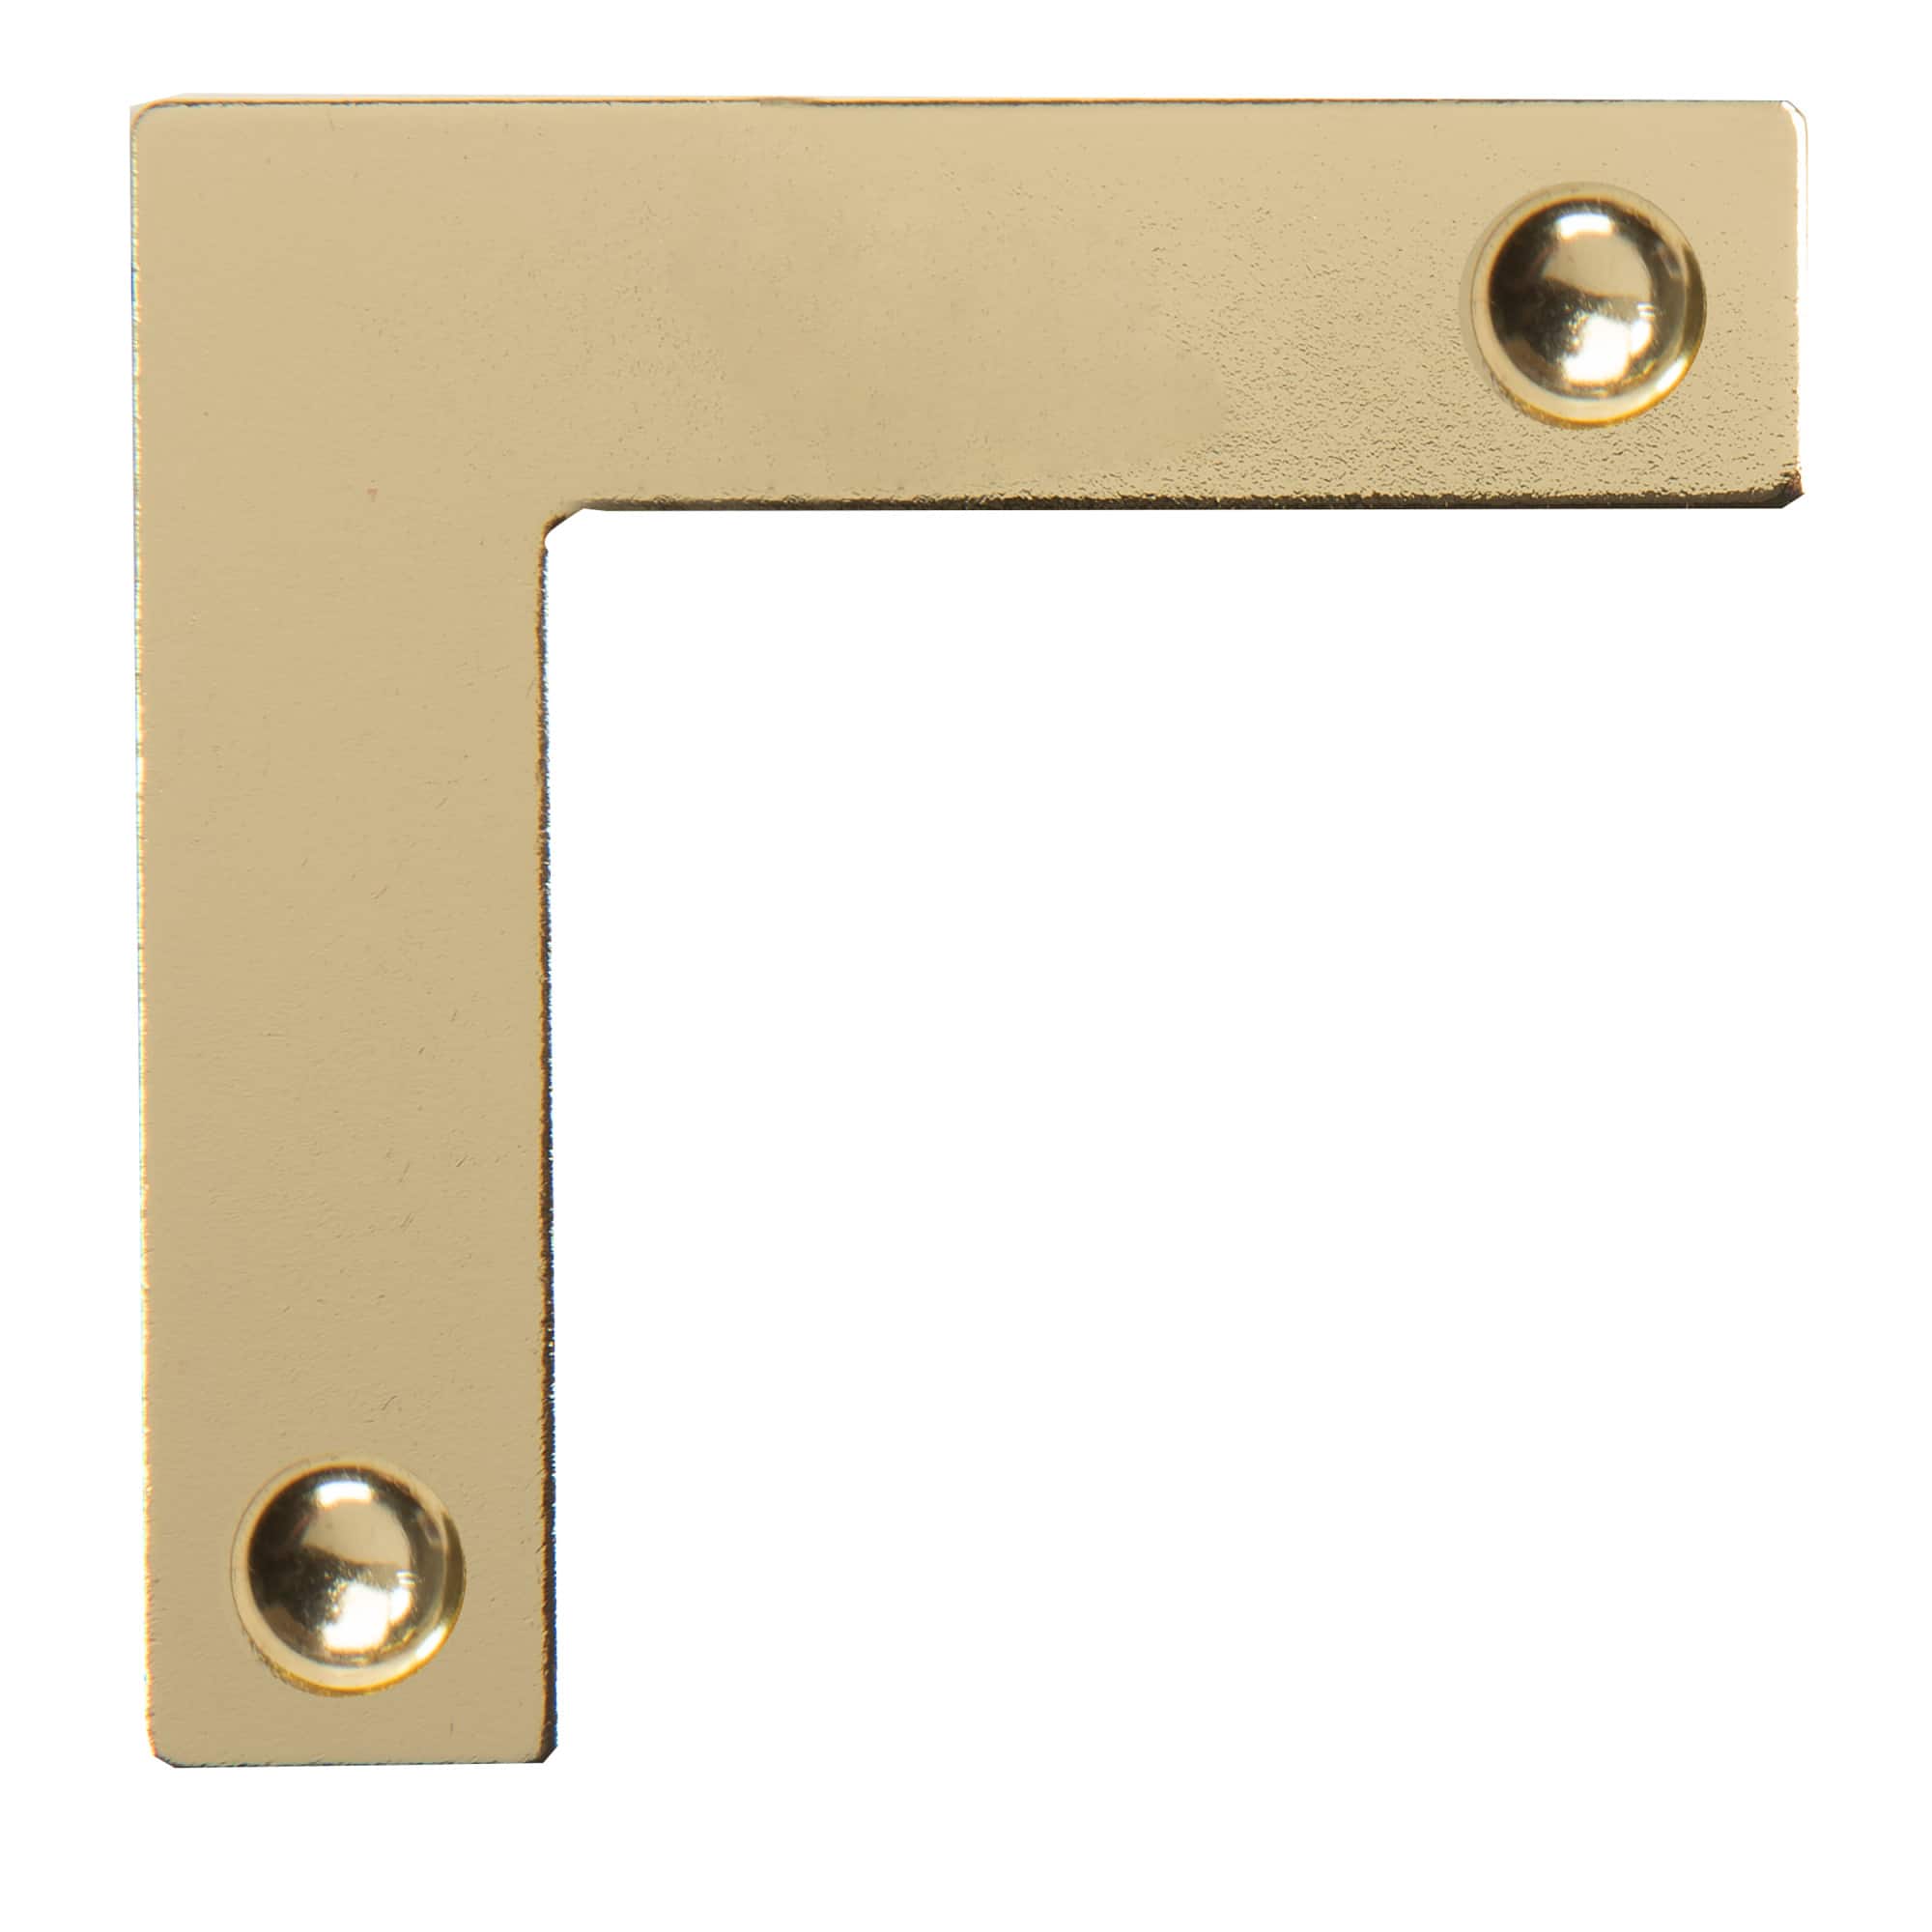 Dritz Home Brass Smooth Campaign Hardware Corners